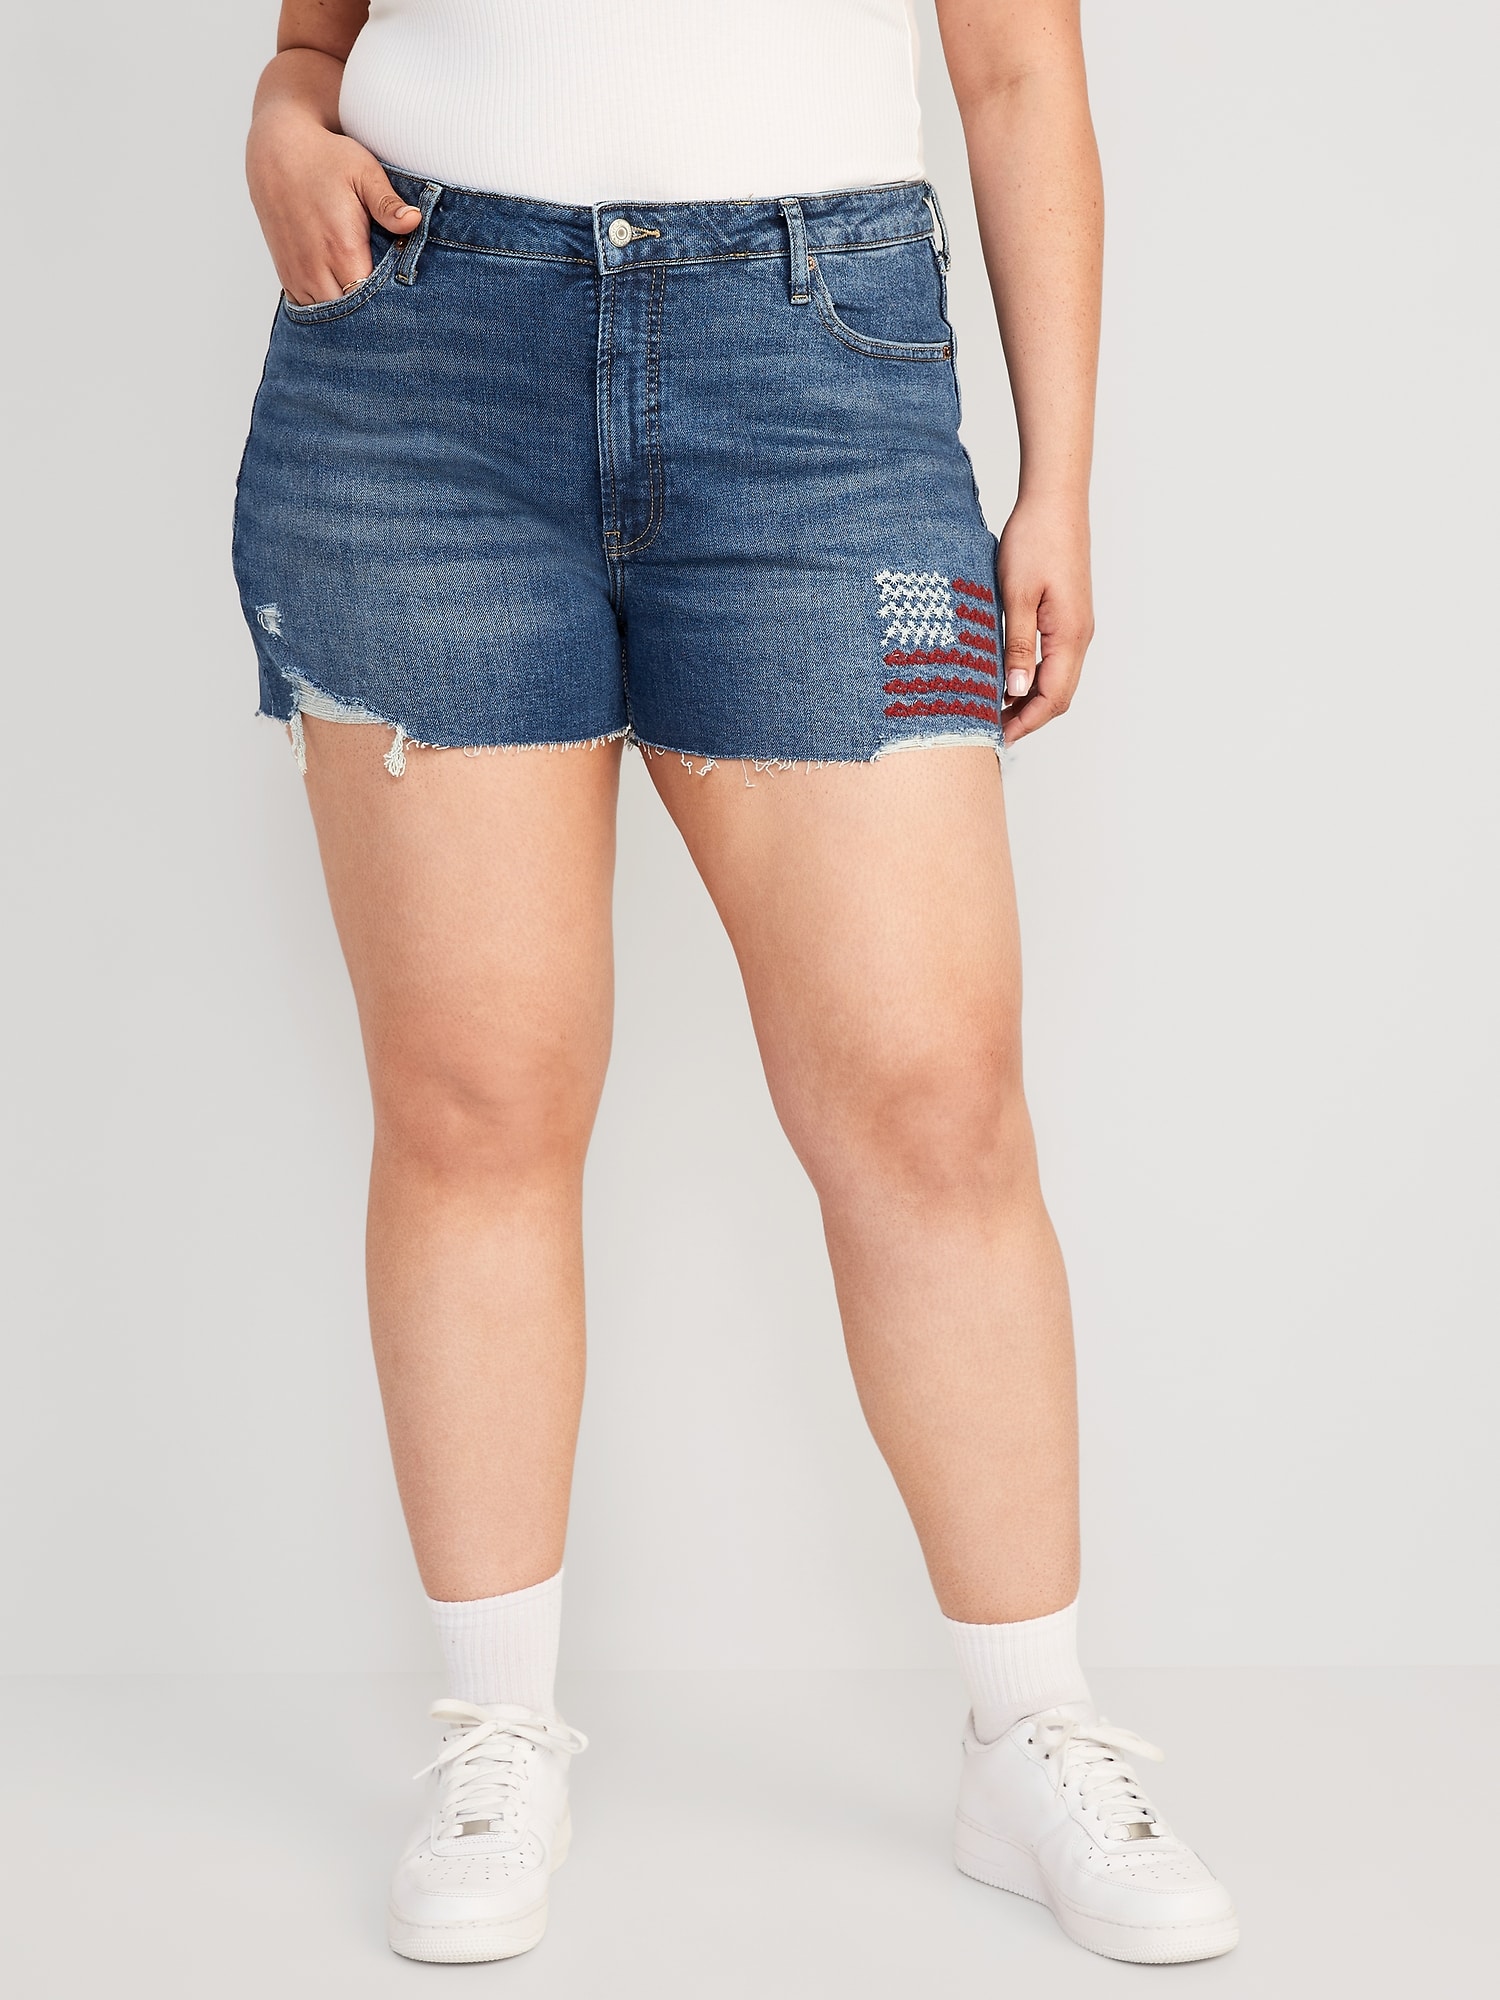 Barely Friend - Loose Fit Shorts for Girls 4-16